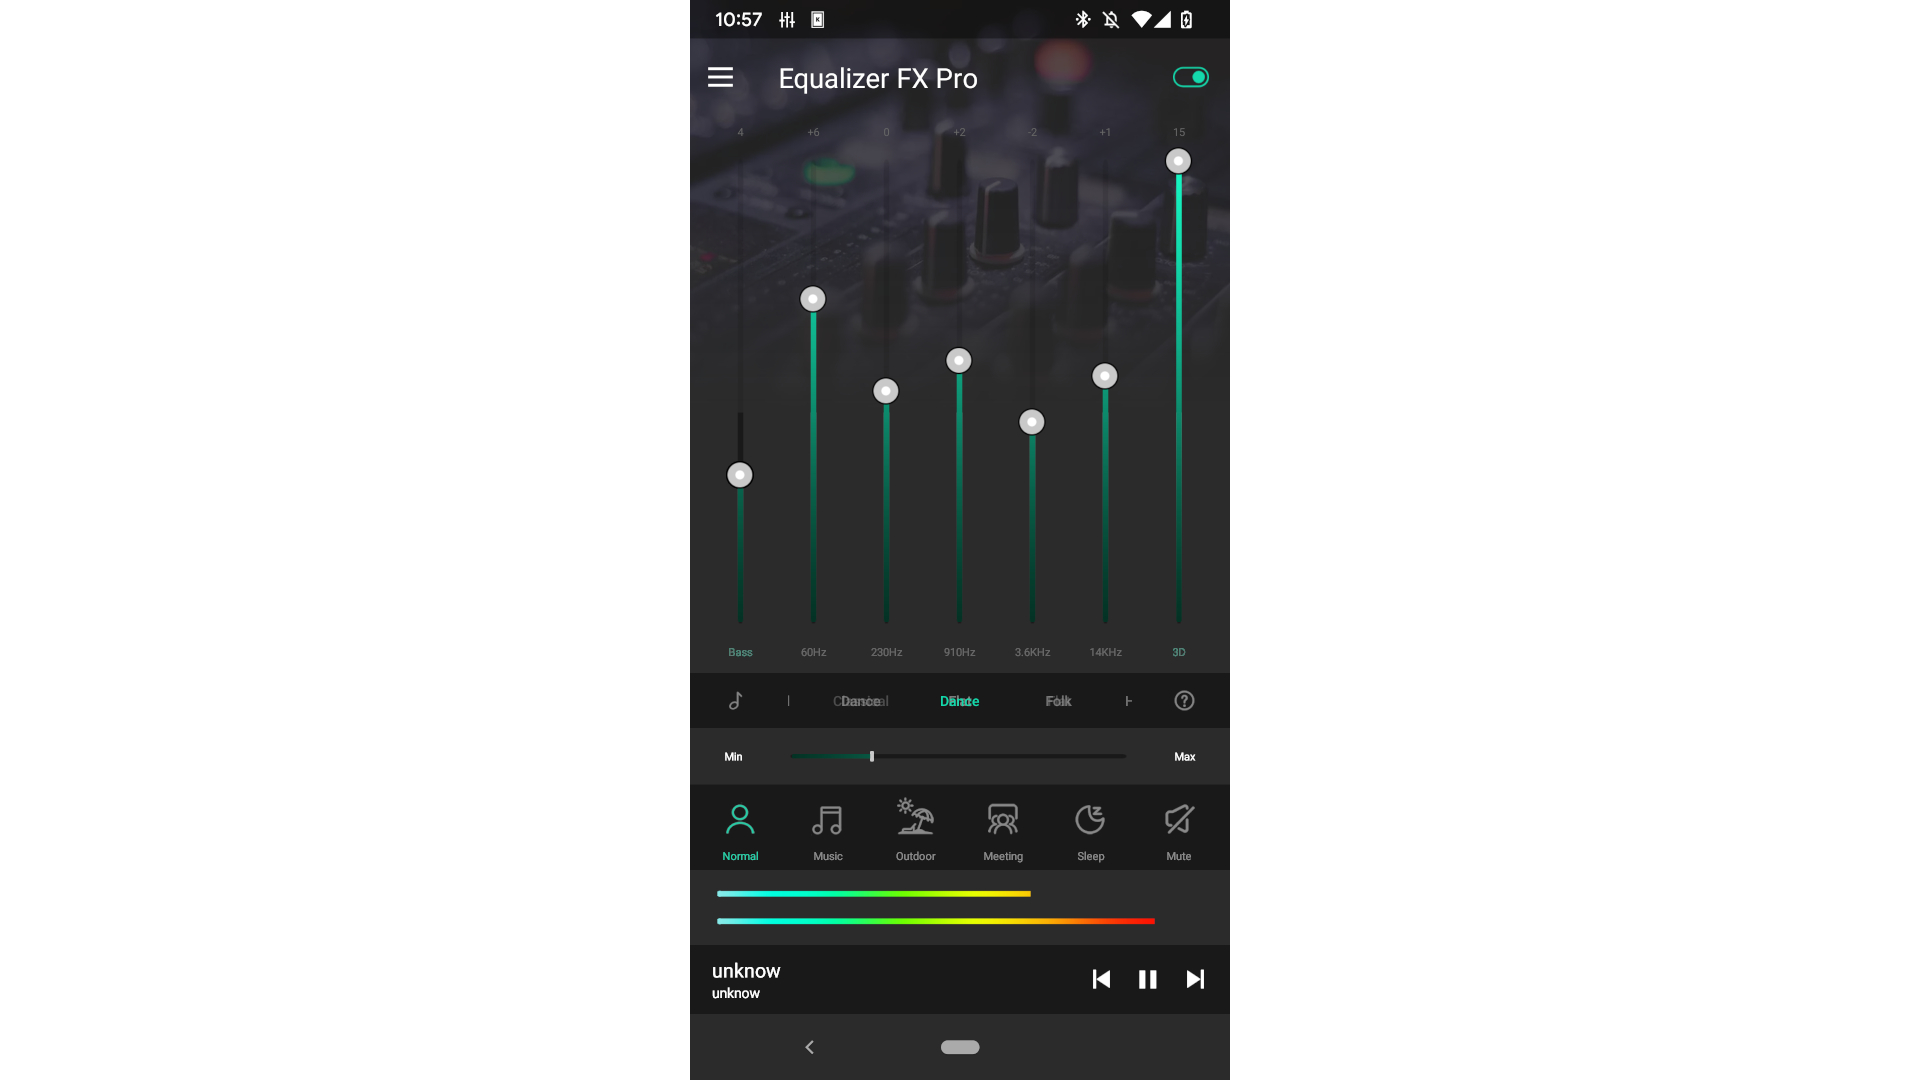 A screenshot of the EqualizerFX Pro app showing the EQ bands and simple interace of the app.